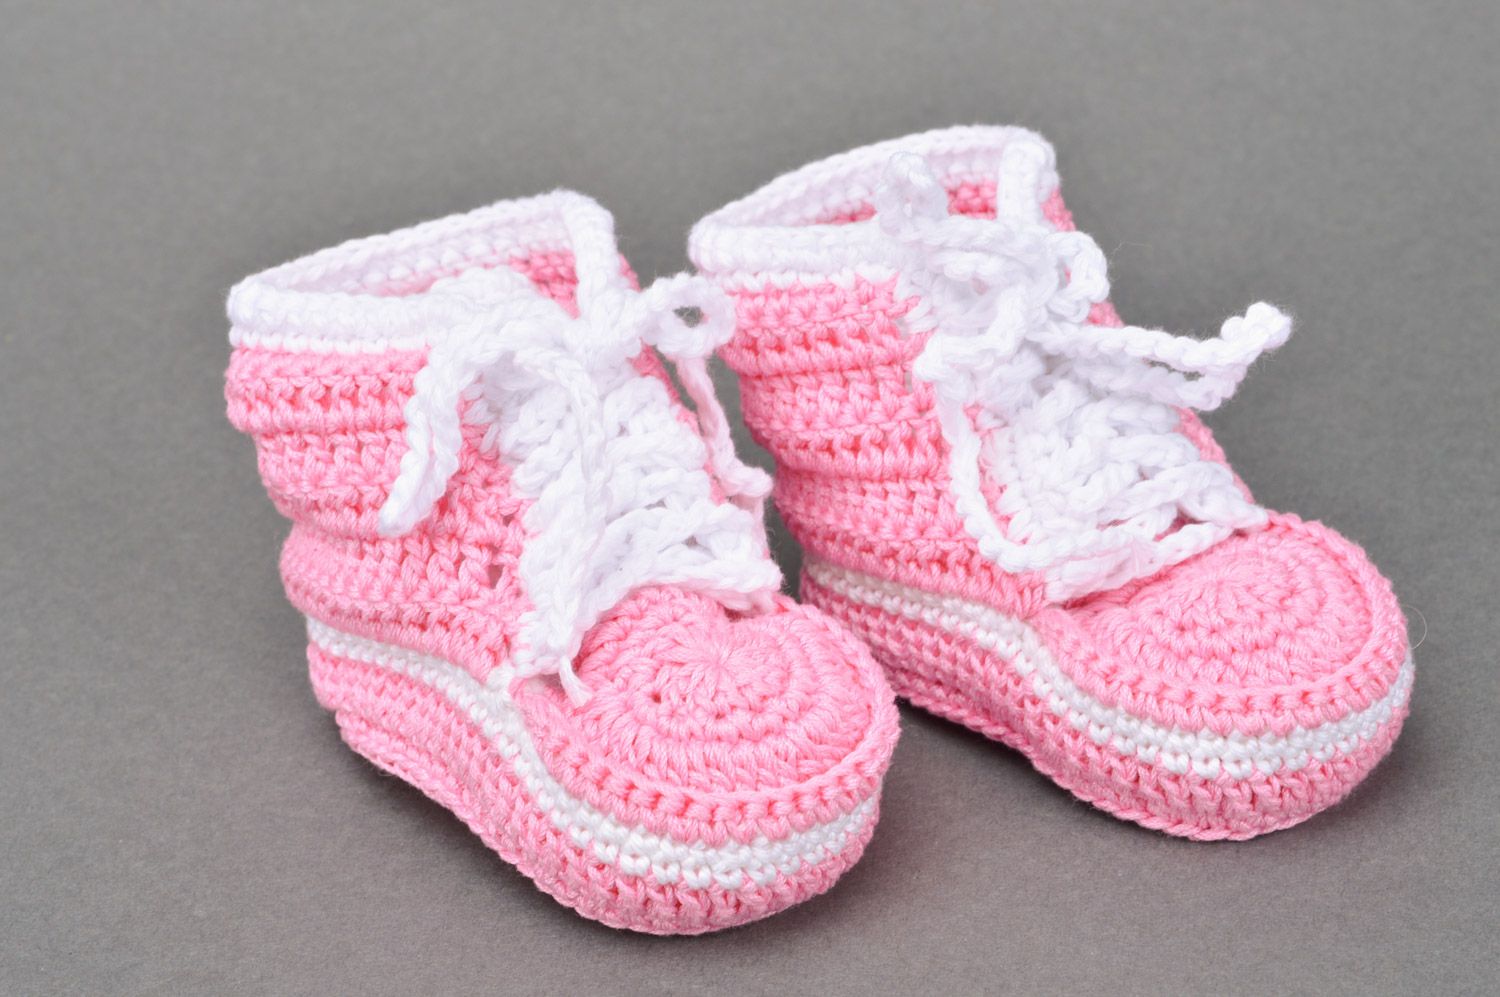 Handmade crocheted pink booties made of cotton in the form of sneakers for girls photo 2